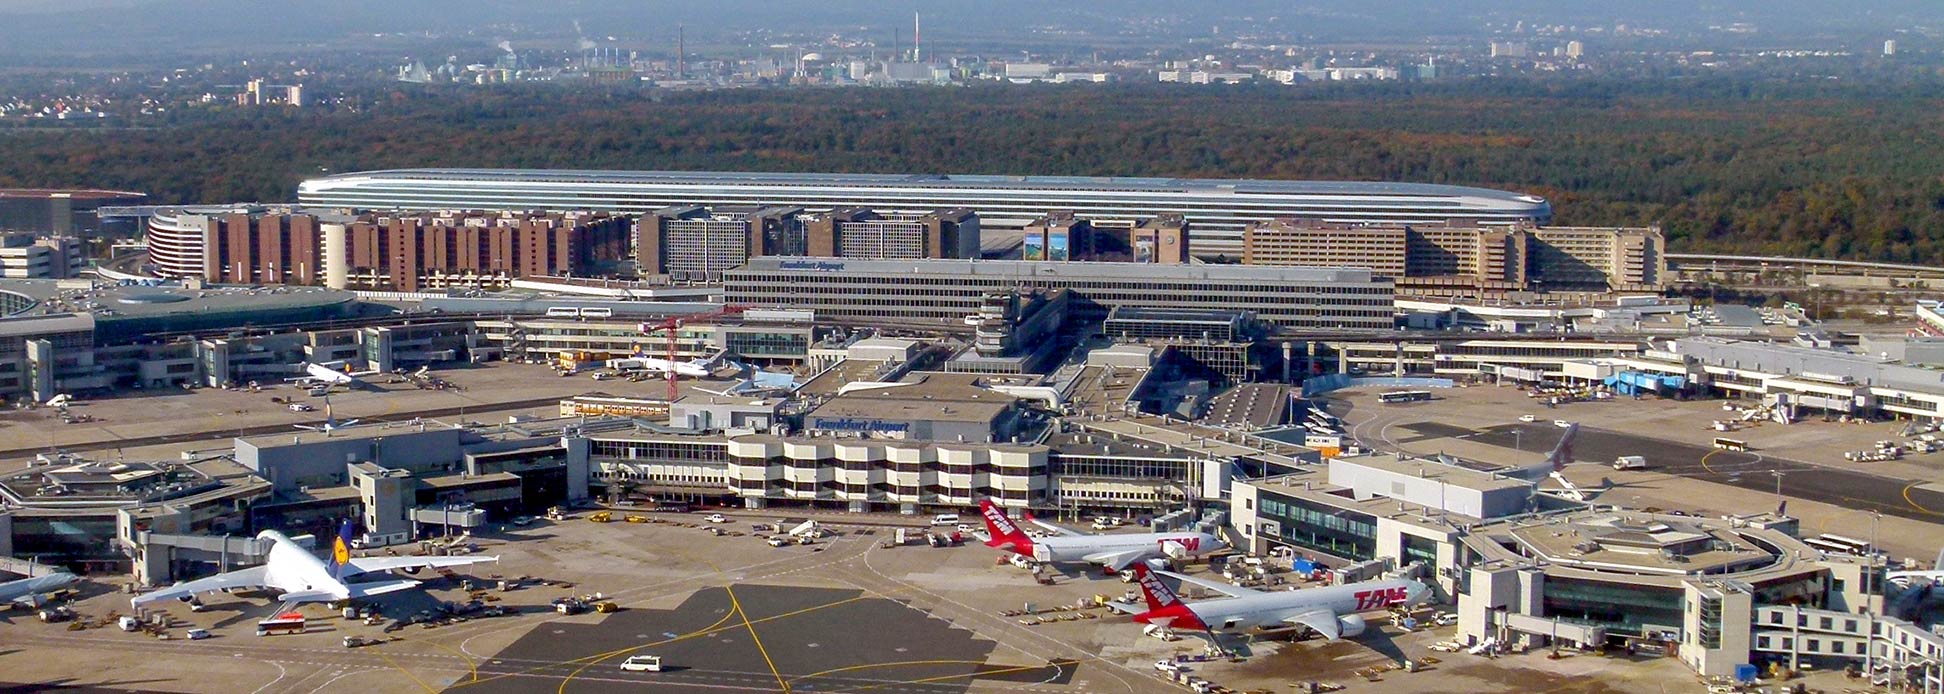 Aerial view of the central buildings of Frankfurt Main Airport, Germany